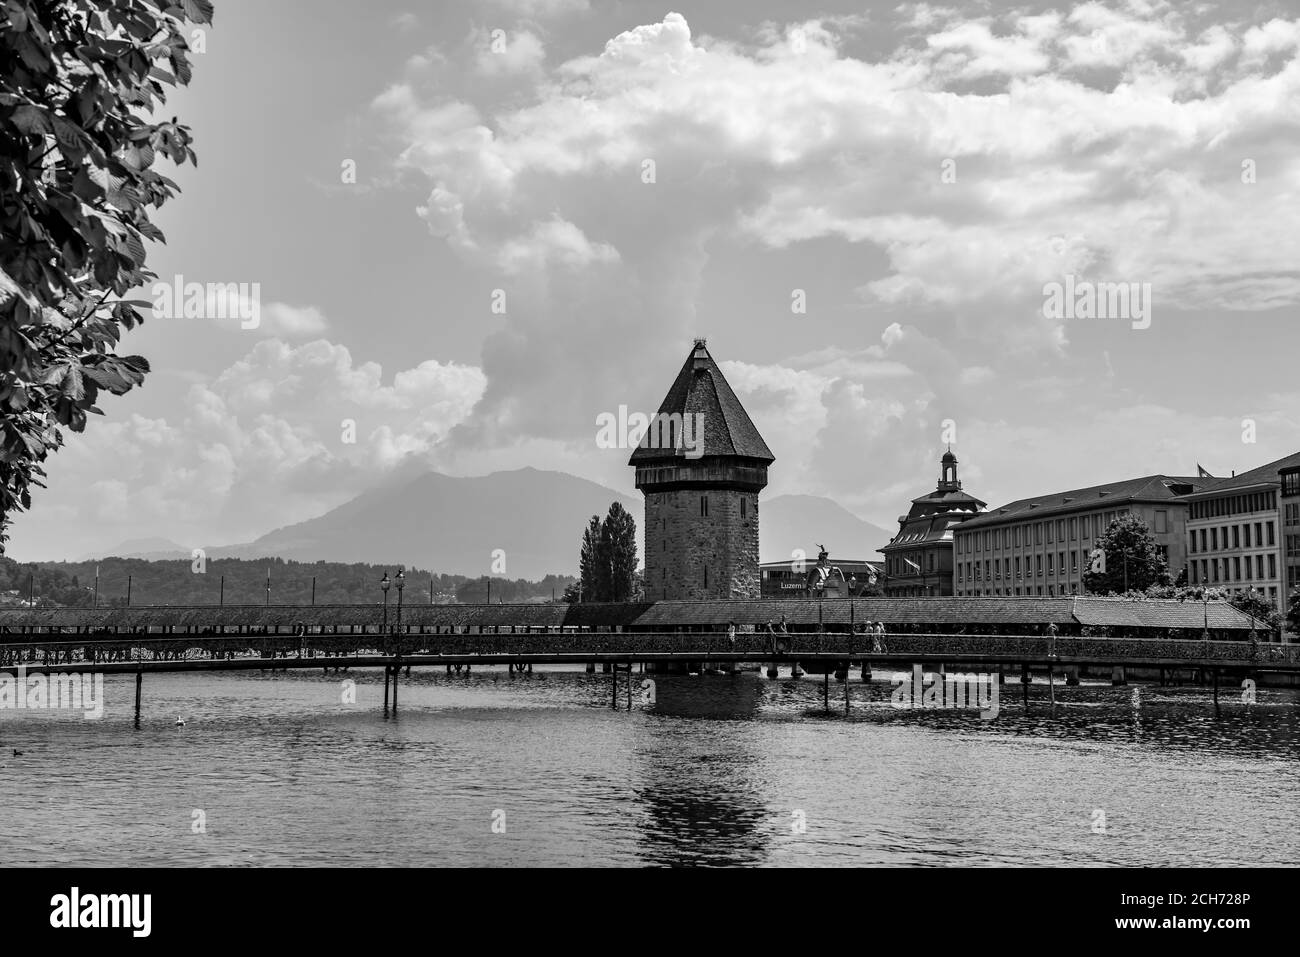 City of Lucerne with Bridge Tower in a Sunny Day in Switzerland. Stock Photo